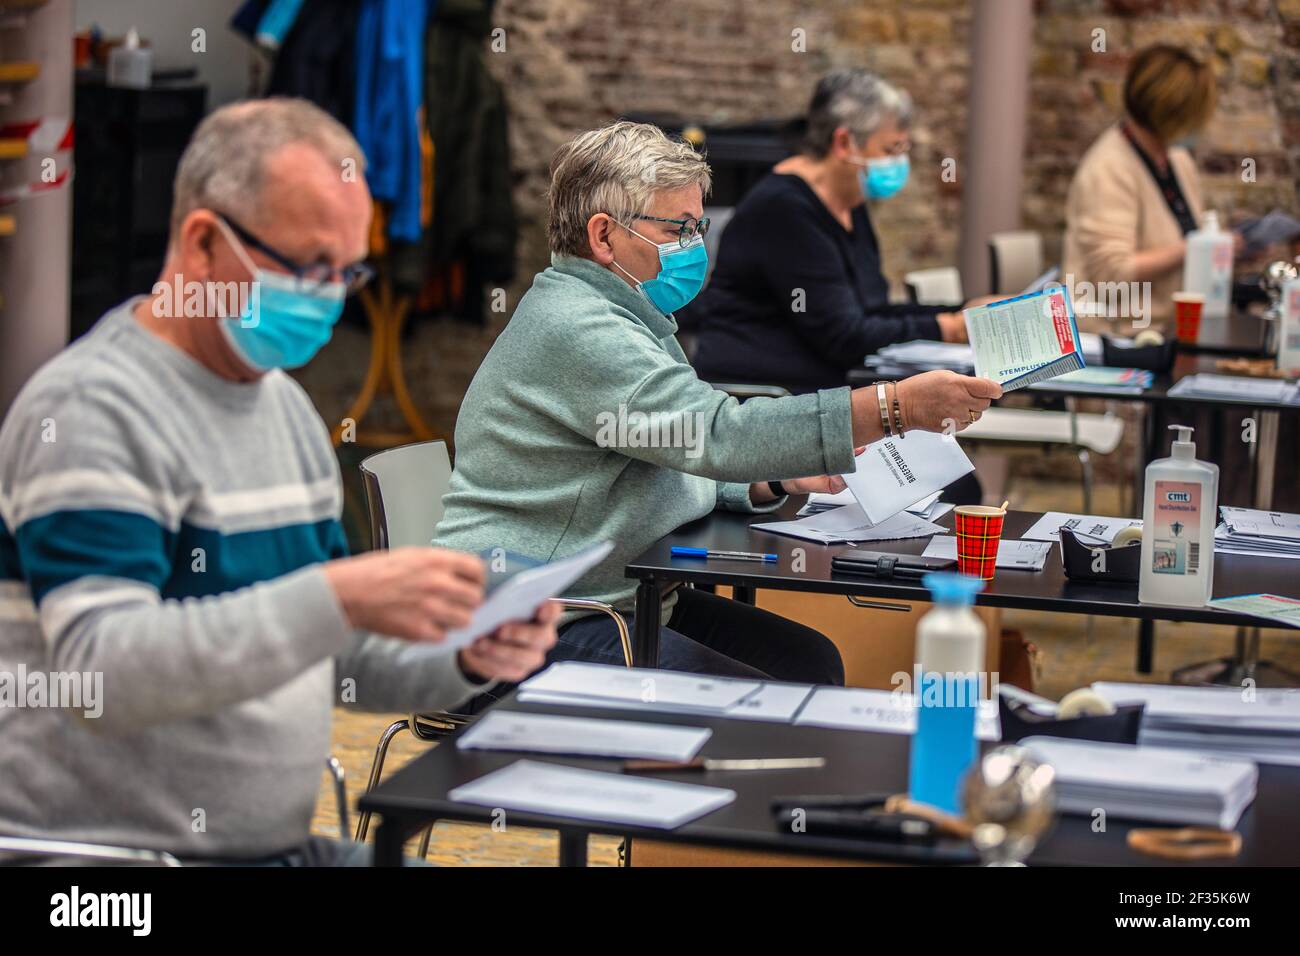 SNEEK, NETHERLANDS – MARCH 15: Polling station clerks are seen opening mail votes on March 15, 2021 in Sneek, Netherlands during the 2021 Dutch General Election. Wednesday is officially election day, but polling stations have already opened on Monday to give the elderly and vulnerable groups the opportunity to avoid the crowds of voters on Wednesday. First, all mail vote envelopes are opened and checked for irregularities.  (Photo by Niels De Vries/BSR Agency/Alamy Live News) Stock Photo